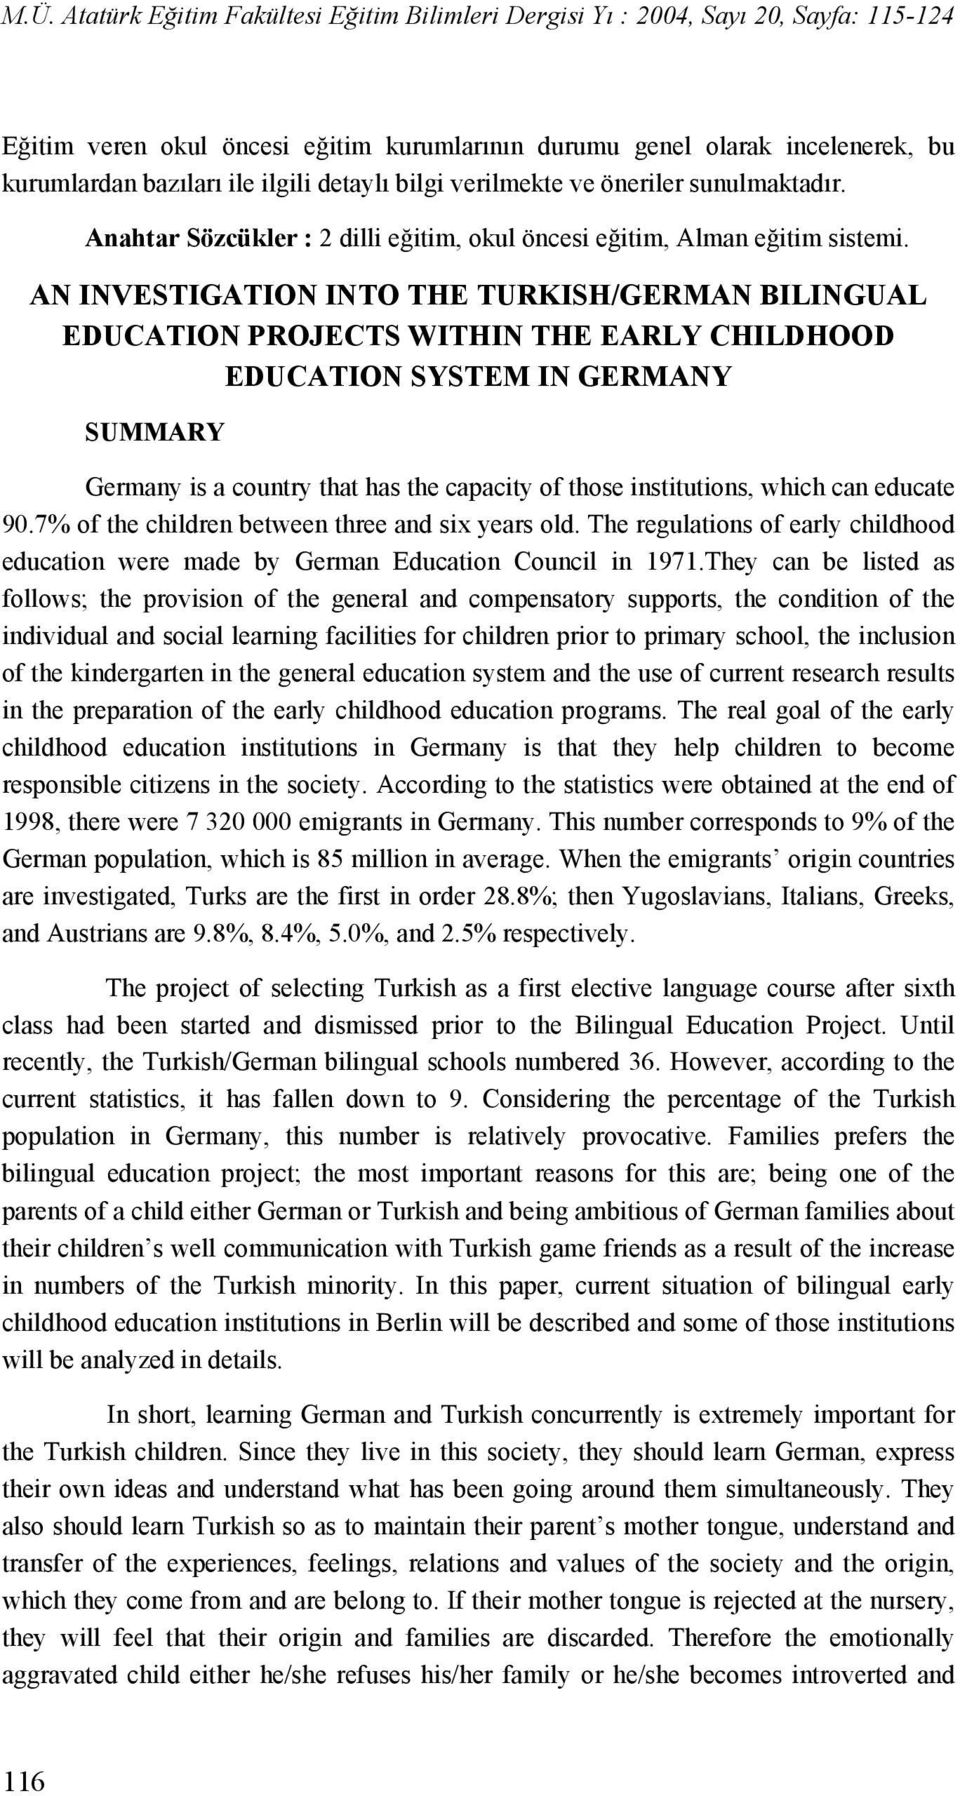 AN INVESTIGATION INTO THE TURKISH/GERMAN BILINGUAL EDUCATION PROJECTS WITHIN THE EARLY CHILDHOOD EDUCATION SYSTEM IN GERMANY SUMMARY Germany is a country that has the capacity of those institutions,